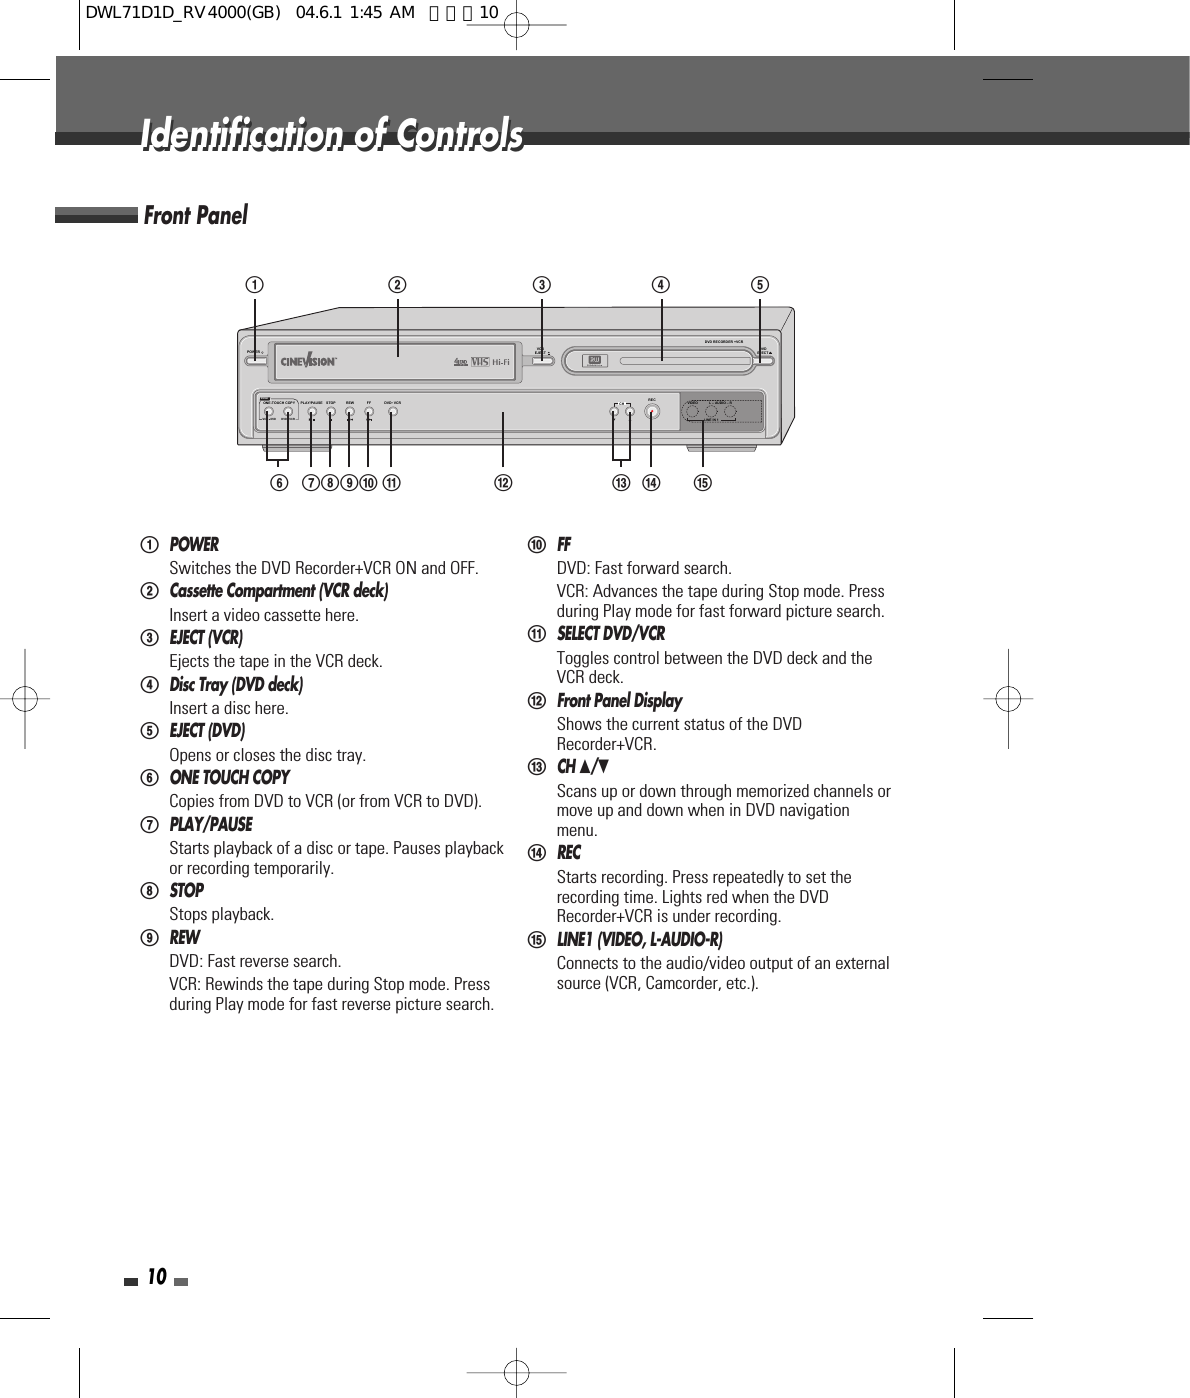 10Identification of ControlsIdentification of Controls!POWERSwitches the DVD Recorder+VCR ON and OFF.@Cassette Compartment (VCR deck)Insert a video cassette here.#EJECT (VCR)Ejects the tape in the VCR deck.$Disc Tray (DVD deck)Insert a disc here.%EJECT (DVD)Opens or closes the disc tray.^ONE TOUCH COPYCopies from DVD to VCR (or from VCR to DVD).&amp;PLAY/PAUSEStarts playback of a disc or tape. Pauses playbackor recording temporarily. *STOPStops playback.(REWDVD: Fast reverse search.VCR: Rewinds the tape during Stop mode. Pressduring Play mode for fast reverse picture search.)FFDVD: Fast forward search.VCR: Advances the tape during Stop mode. Pressduring Play mode for fast forward picture search.1SELECT DVD/VCRToggles control between the DVD deck and theVCR deck.2Front Panel DisplayShows the current status of the DVDRecorder+VCR.3CH …/†Scans up or down through memorized channels ormove up and down when in DVD navigationmenu.4RECStarts recording. Press repeatedly to set therecording time. Lights red when the DVDRecorder+VCR is under recording.5LINE1 (VIDEO, L-AUDIO-R)Connects to the audio/video output of an externalsource (VCR, Camcorder, etc.).POWERPLAY/PAUSE STOP REW FF DVD• VCRRECCHVCREJECTVCR VCRDVD DVDONE-TOUCH COPYDUALDVD RECORDER +VCRDVDEJECTL – AUDIO – RLINE IN 1VIDEO! @ # $ %^ 3&amp;*() 1 2 4 5Front PanelDWL71D1D_RV4000(GB)  04.6.1 1:45 AM  페이지10